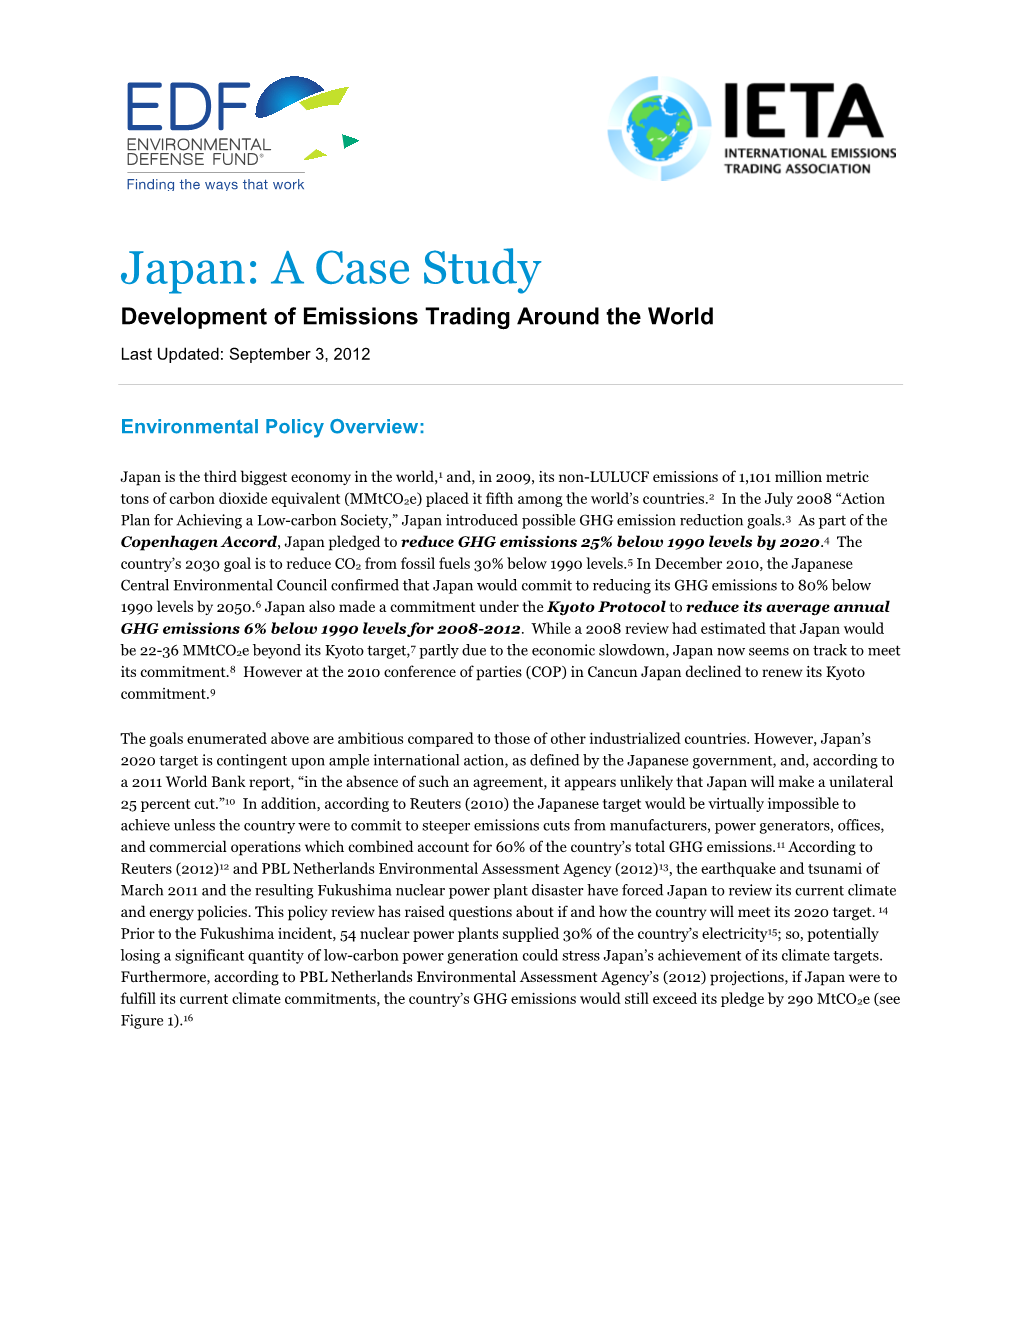 Japan: a Case Study Development of Emissions Trading Around the World